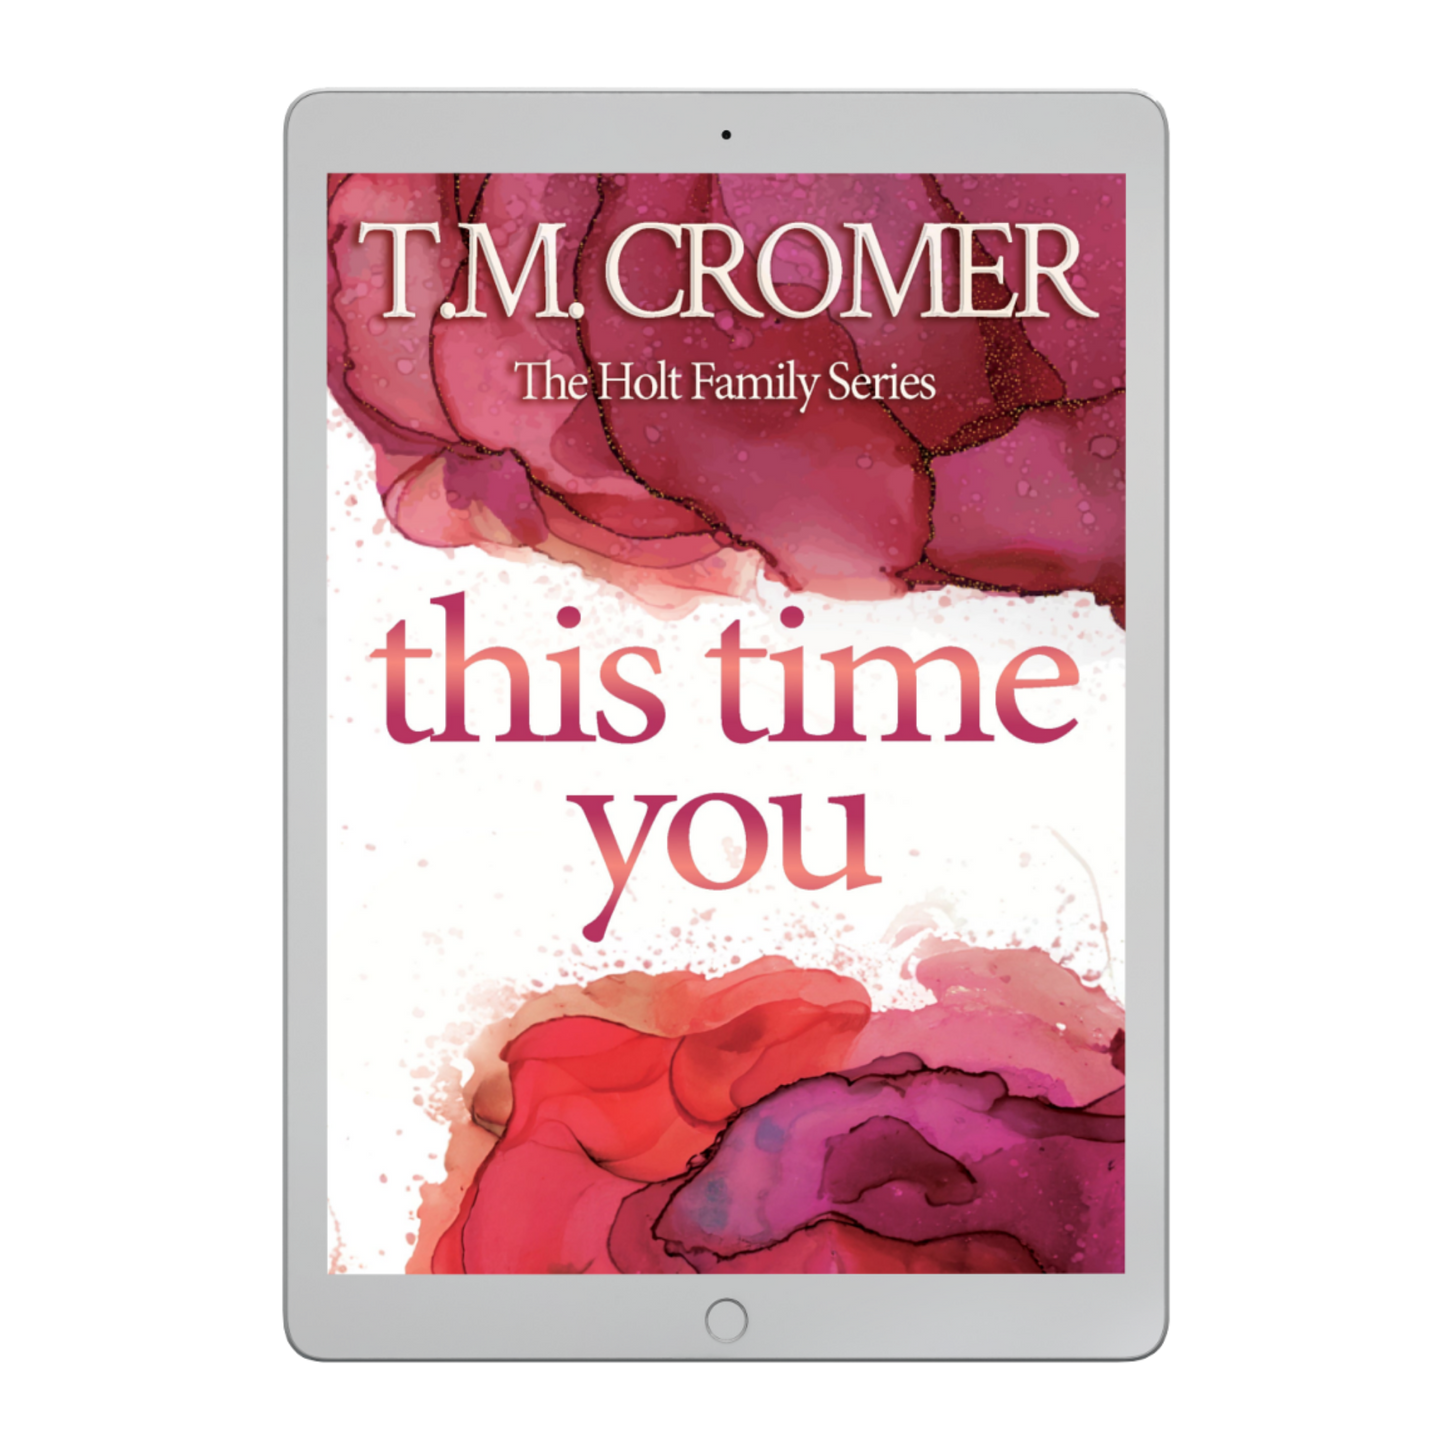 This Time You The Holt Family #2 Ebook Contemporary Romance Romantic Suspense Women's Fiction